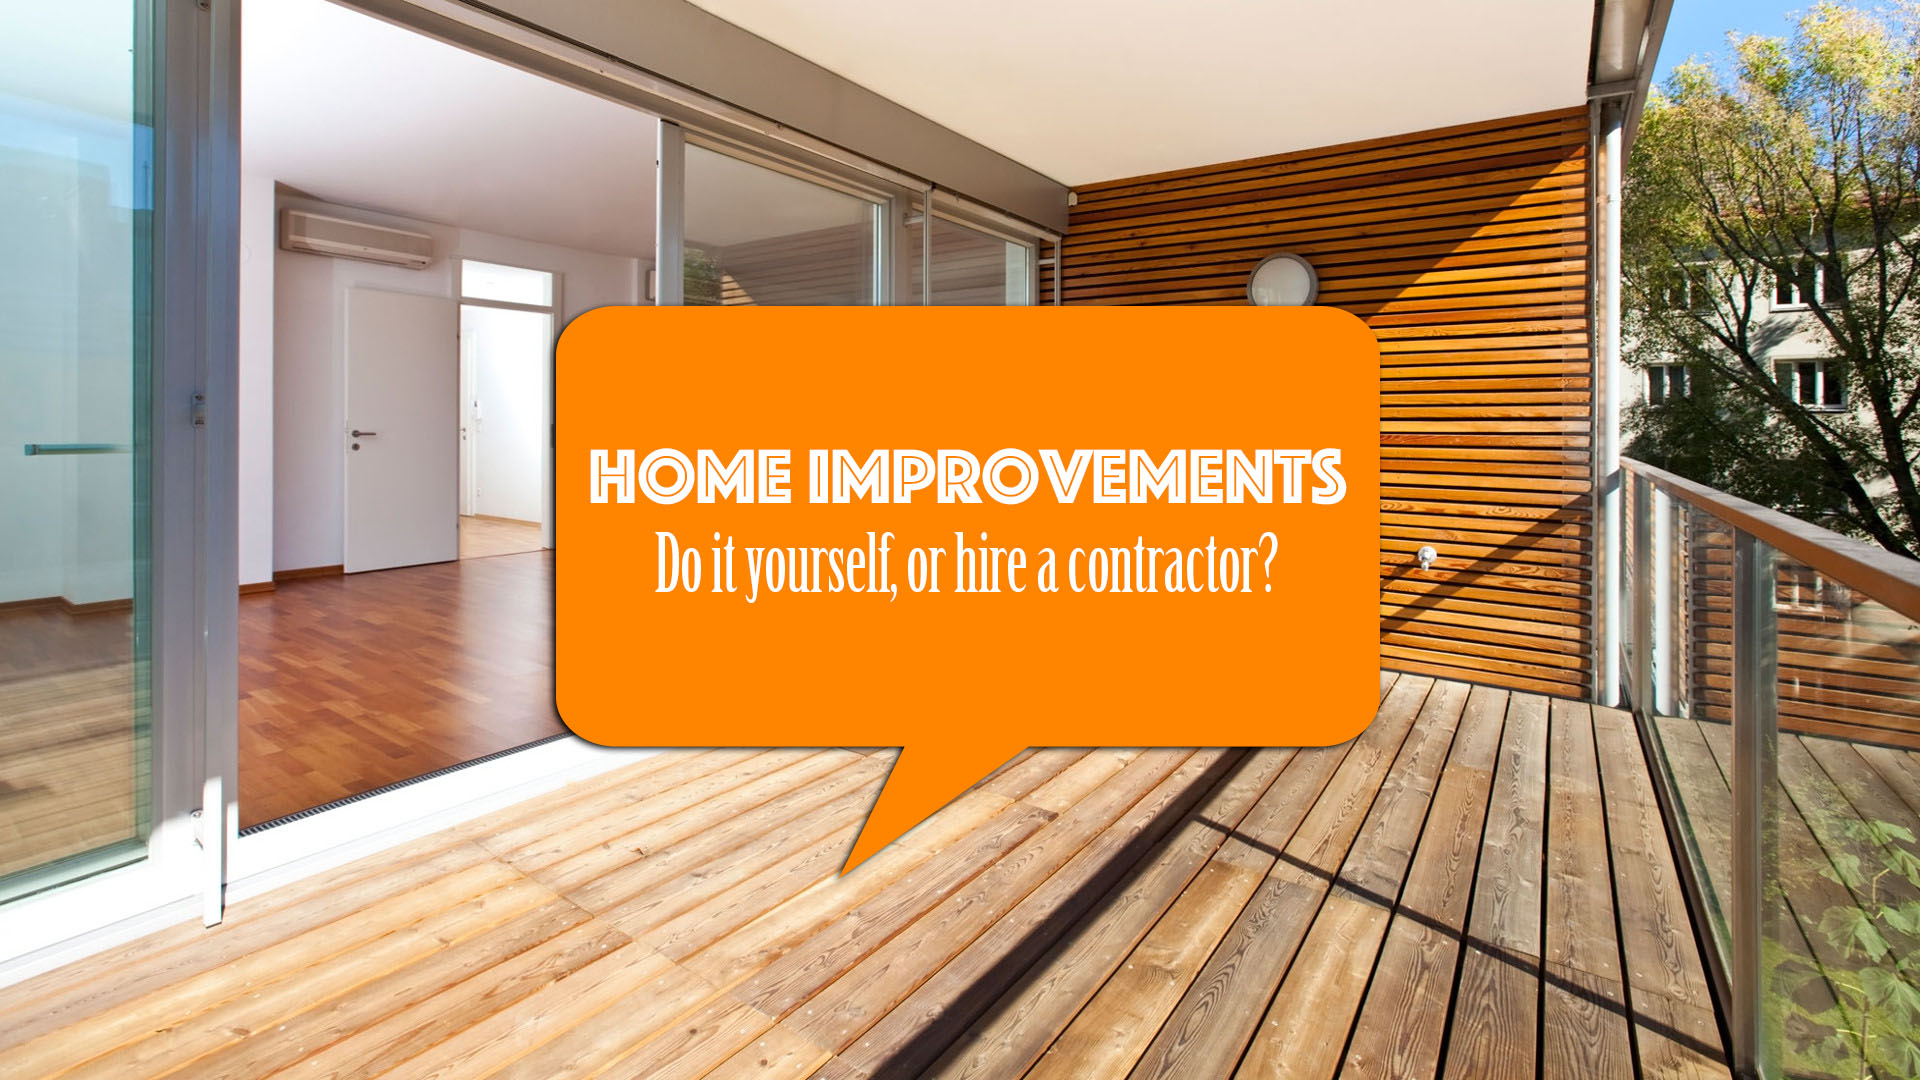 Home improvements – Do it yourself or hire a contractor?